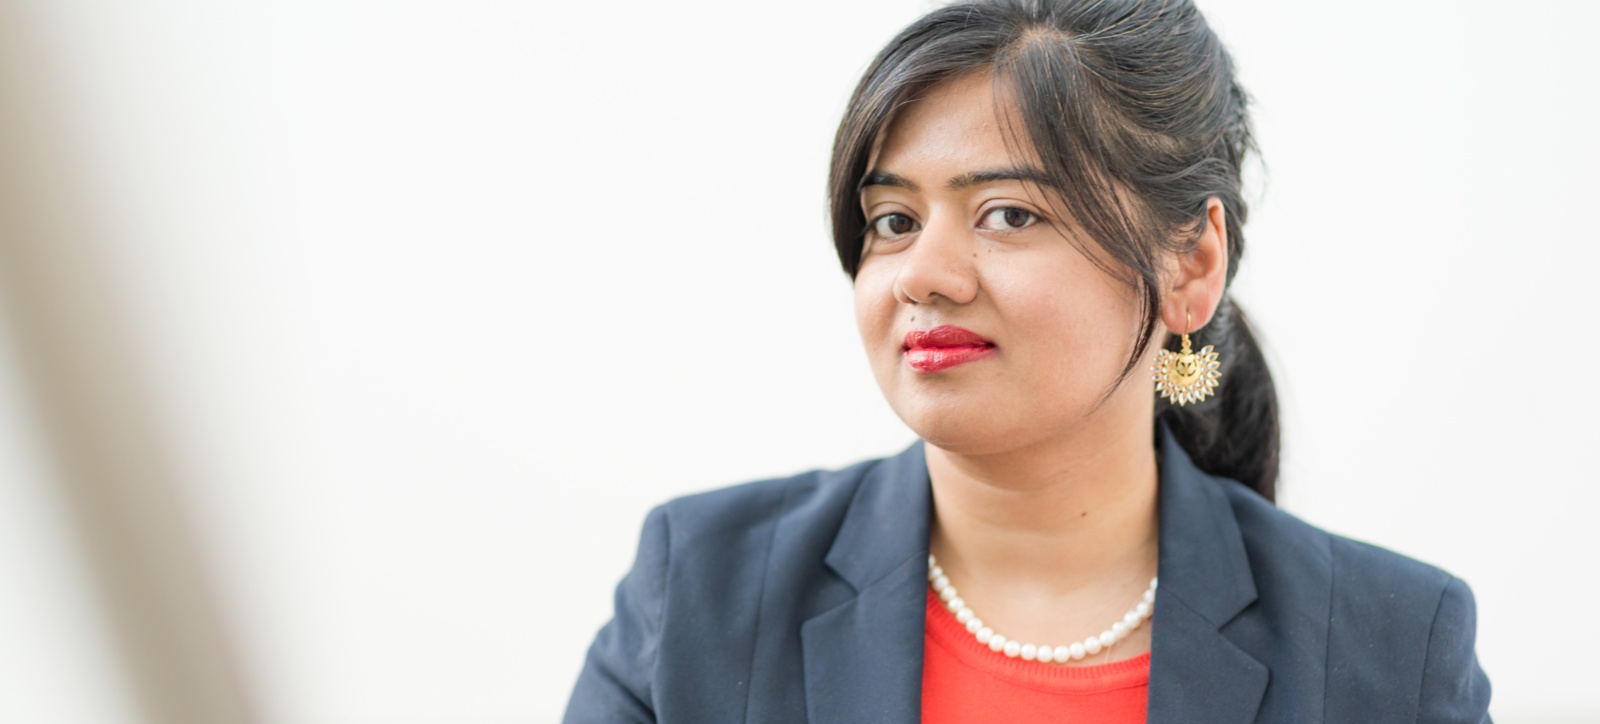 Shweta Singh, Associate Professor of Information Systems and Management at Warwick Business School